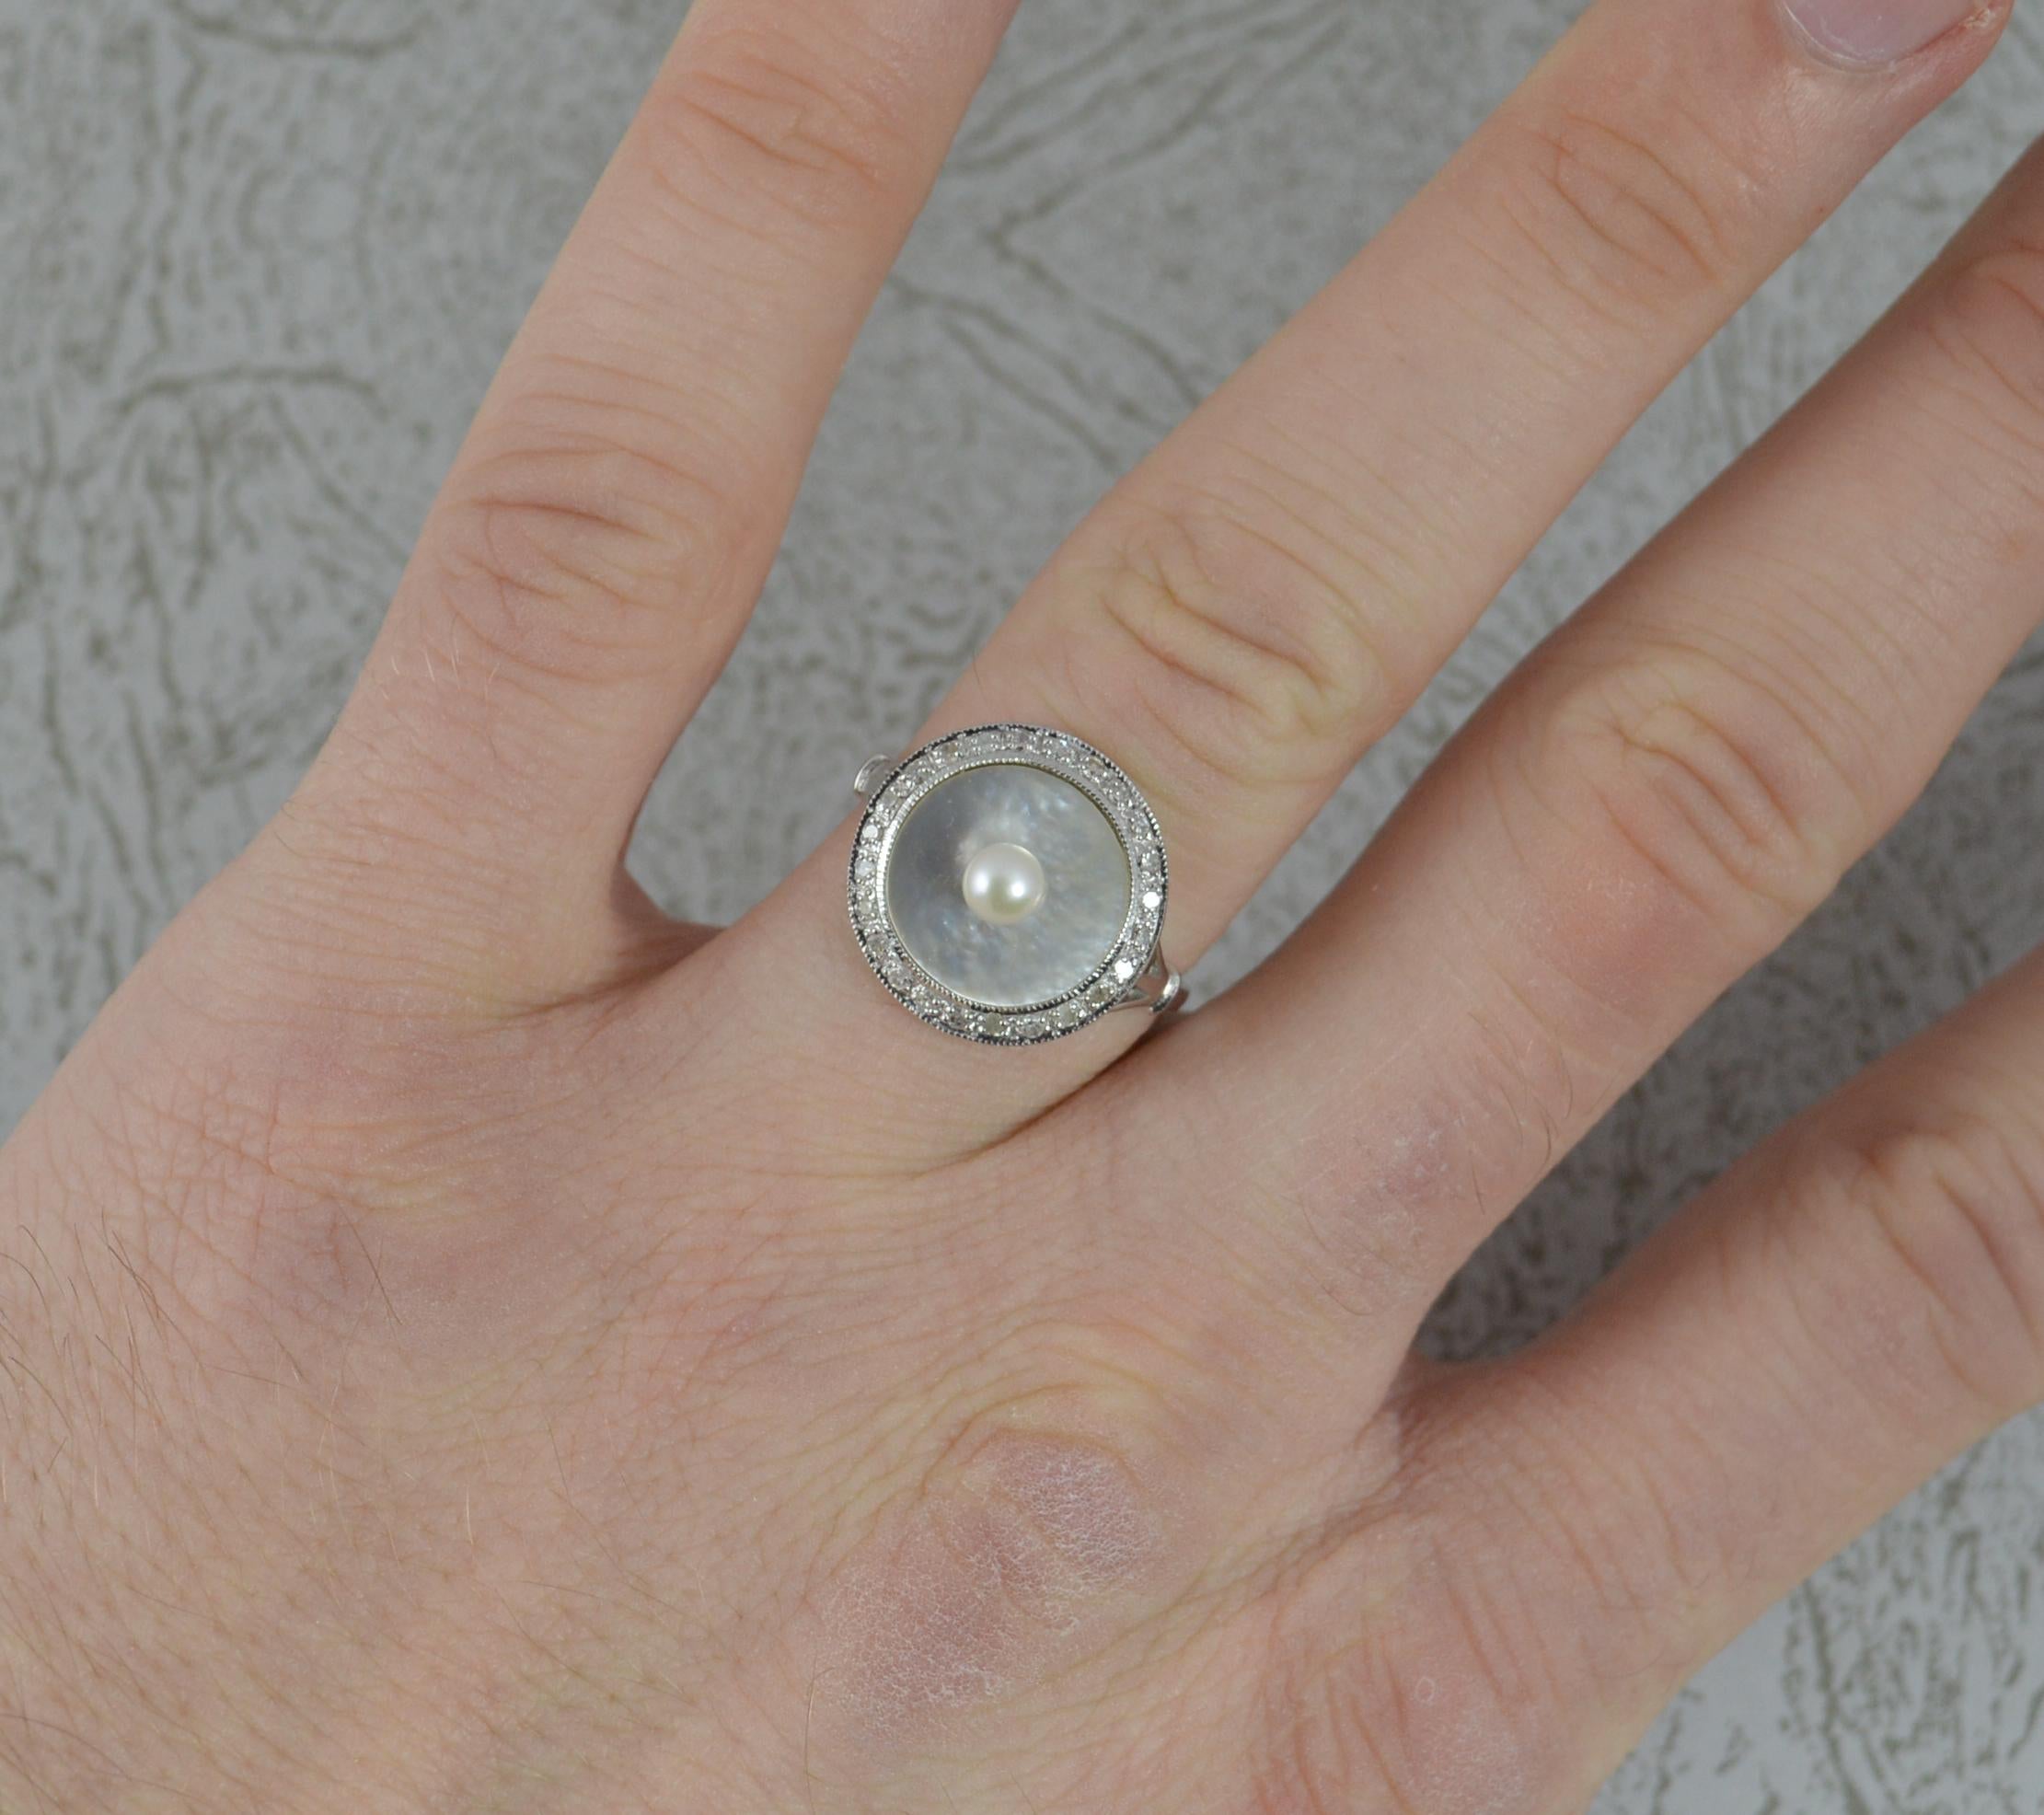 A superb 18ct gold, mother of pearl, pearl and diamond panel ring.
18 carat white gold example.
15mm diameter circular panel head.
Formed with a pearl to the centre applied onto a mother of pearl panel. Surrounding are over 25 natural round cut